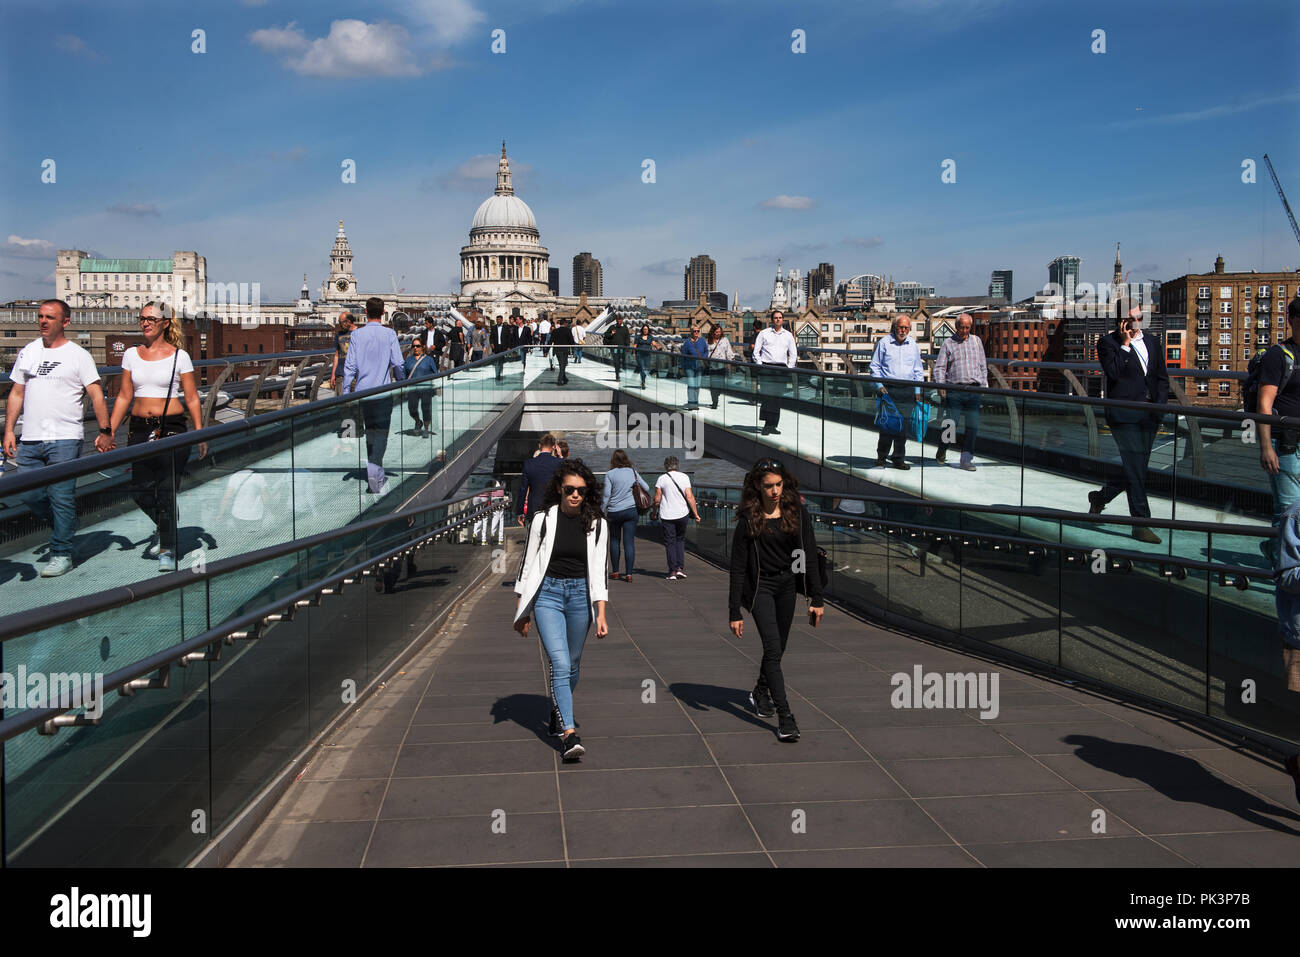 City of London, London England, Panoramic view from Millennium Bridge across the River Thames. Sept 2018 Walking across the Millennium Bridge to the S Stock Photo